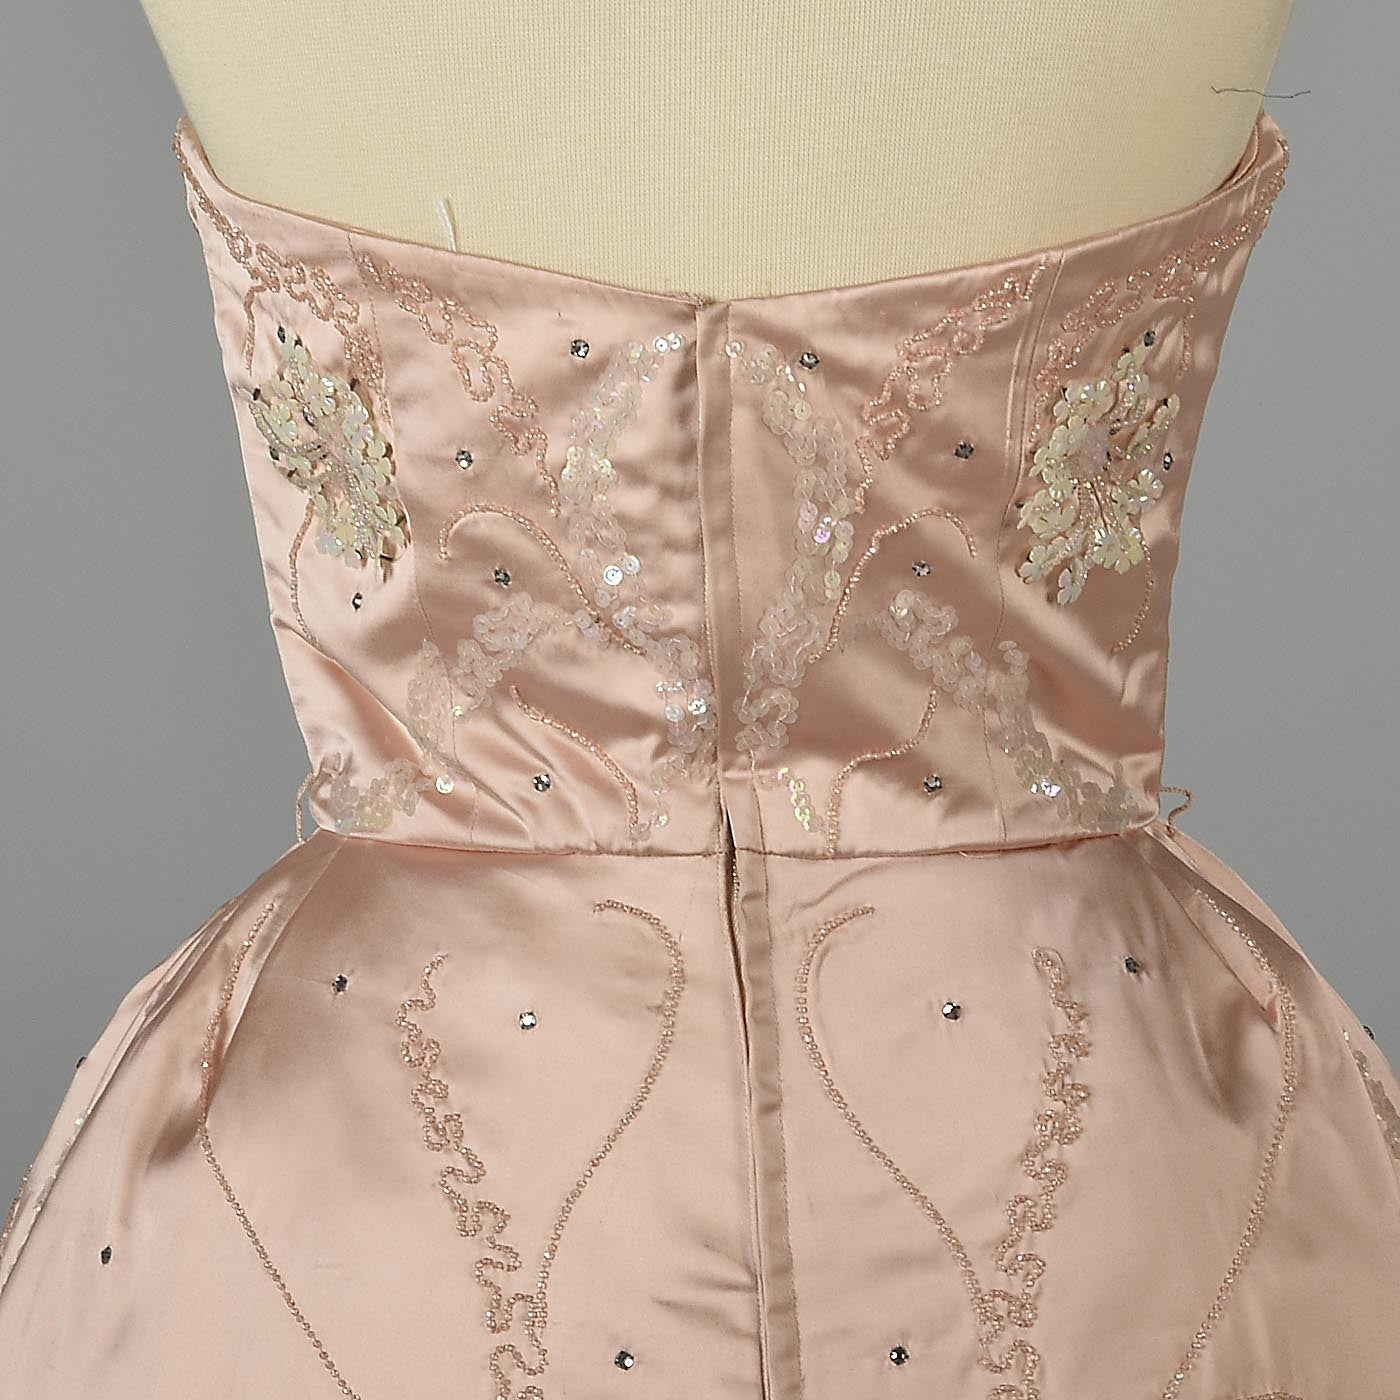 1950s Pink Silk Satin Gown with Three Dimensional Beading from Marshall Field's 28 Shop